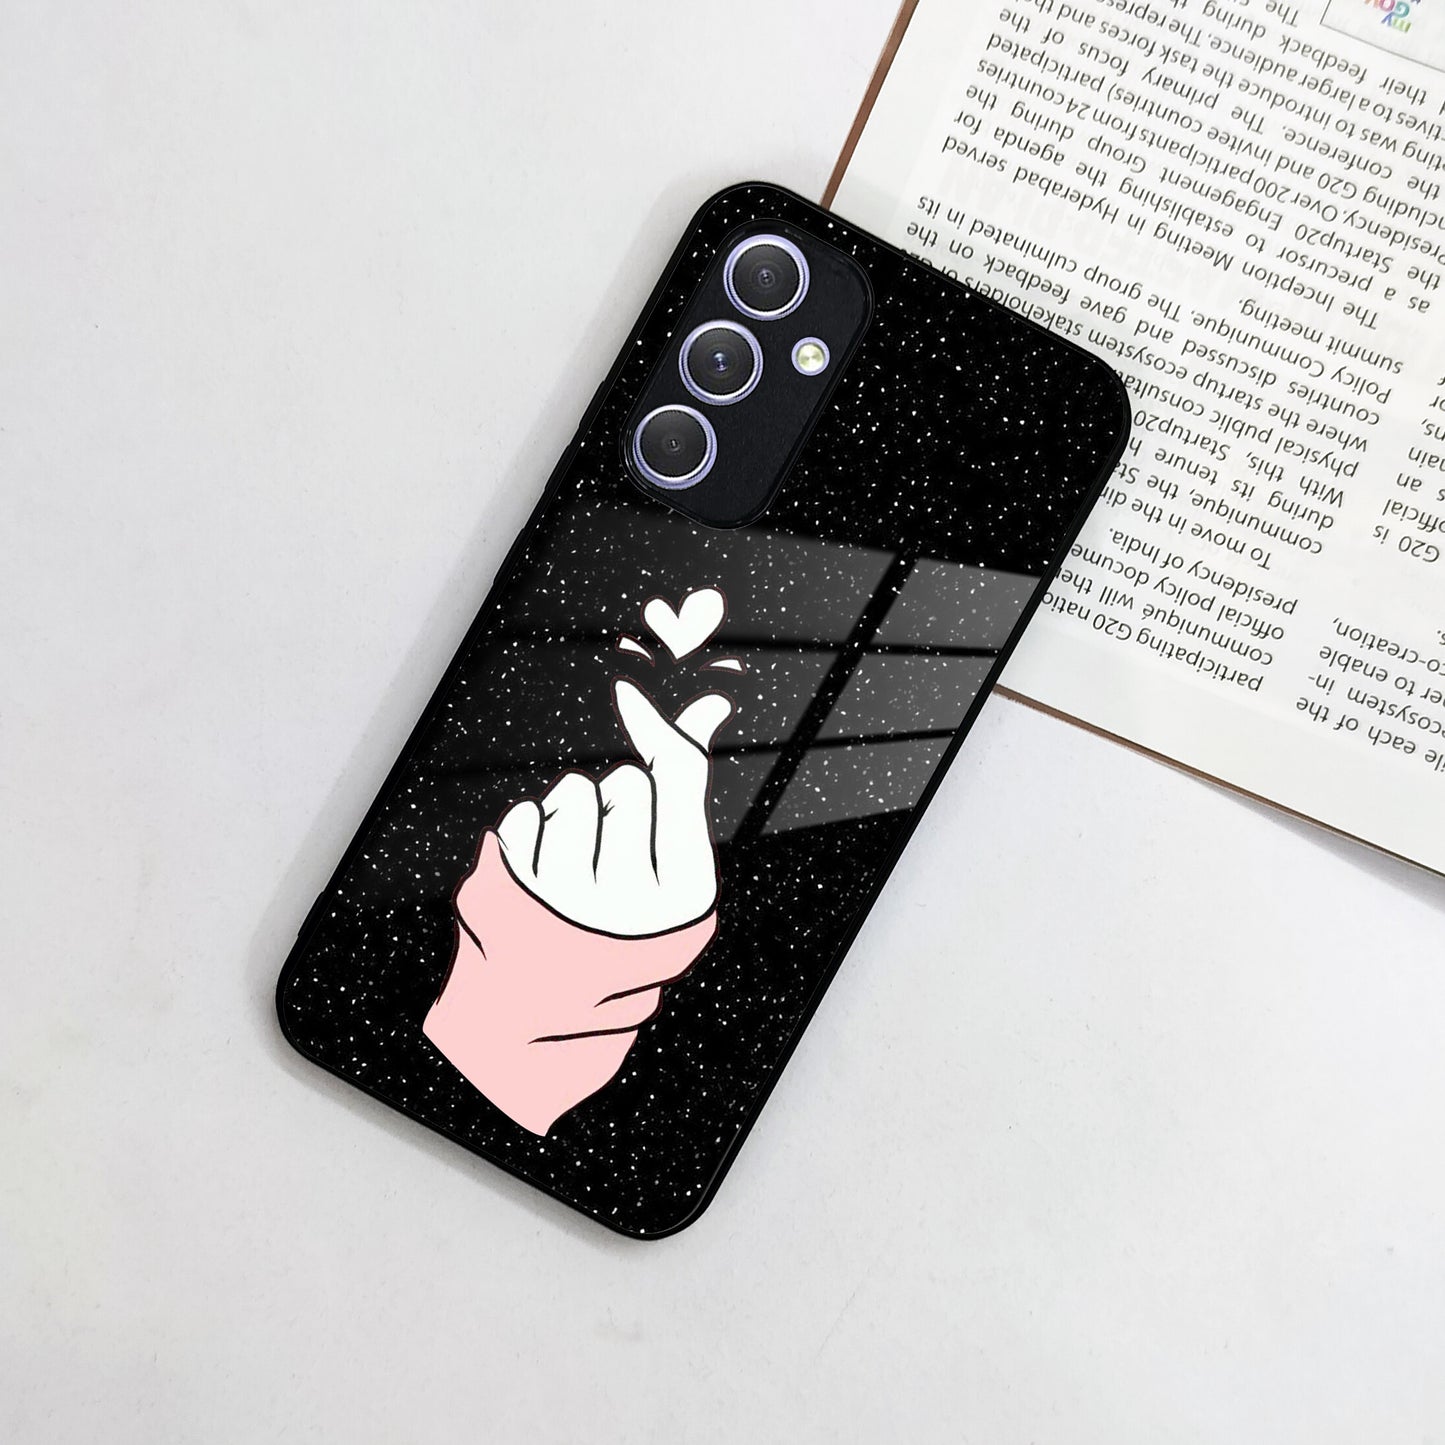 Kpop Love Glass Phone Case And Cover For Samsung